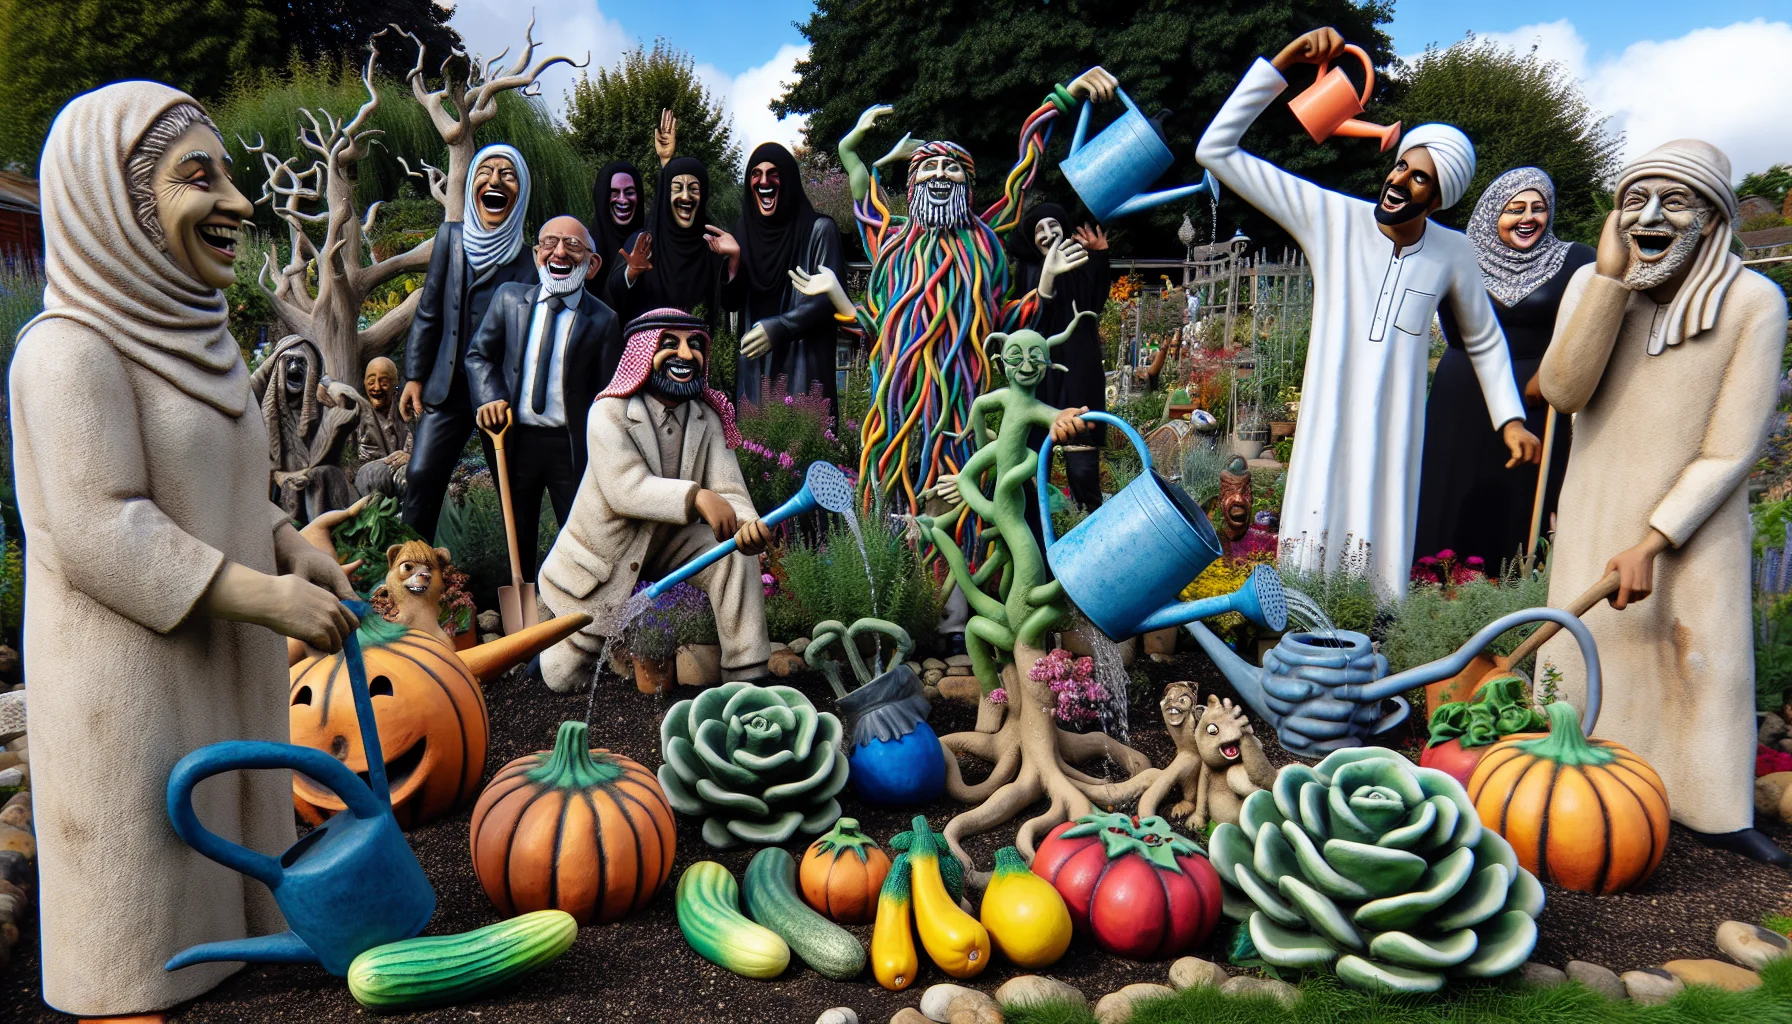 A vivid scene in a garden filled with Hypertufa garden sculptures taking on a life of their own in a humorous way. One could be mischievously watering the plants with overgrown water cans, another posing dramatically with a spade, a third juggling colorful, oversized, garden vegetables while a fourth is hilariously tangled in a garden hose. In the background, diverse group of people, some Middle-Eastern, Black, Caucasian, Hispanic and South Asian, both male and female, laugh, point and take pictures, thus encouraging the joy of gardening.